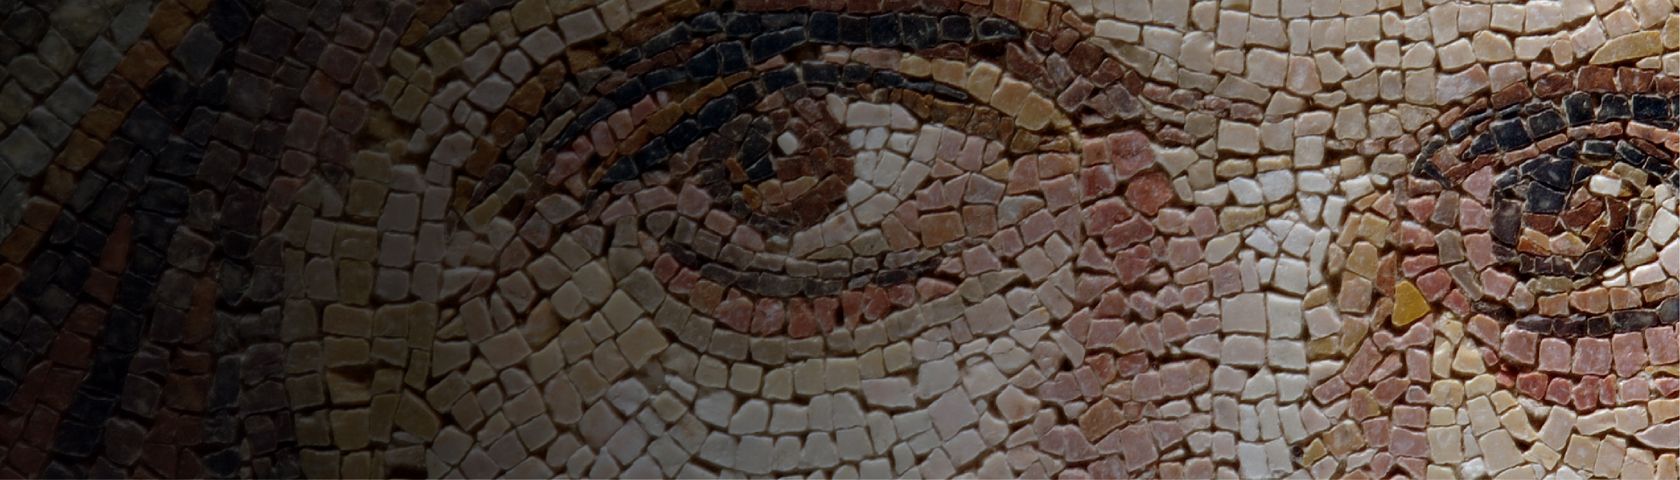 A tile mosaic of someone's eyes.